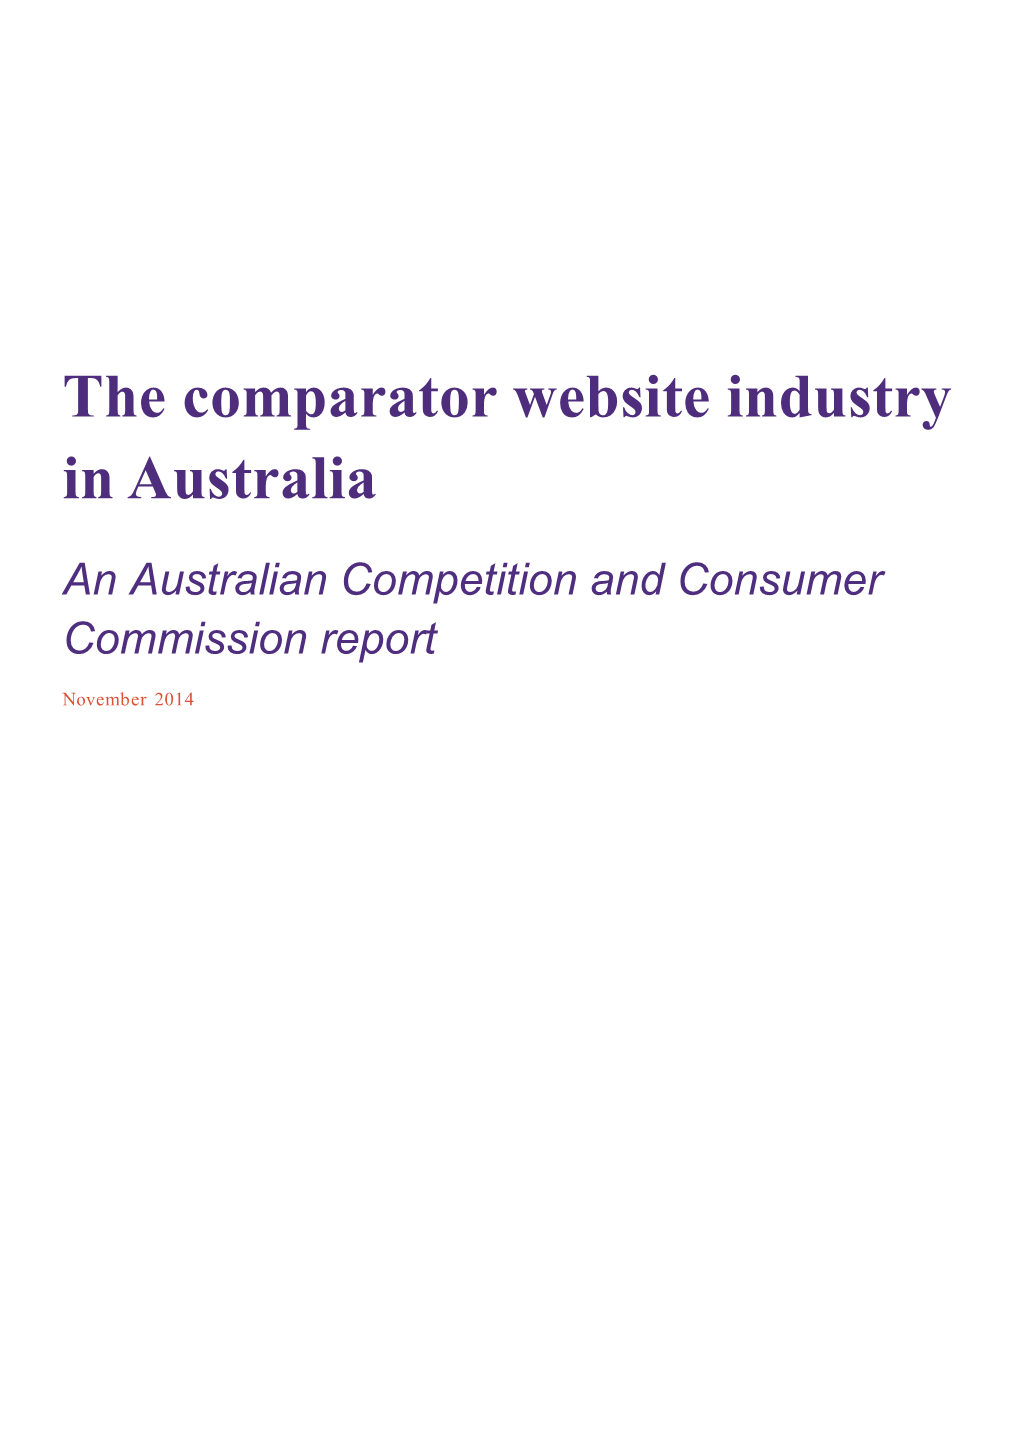 The Comparator Website Industry in Australia